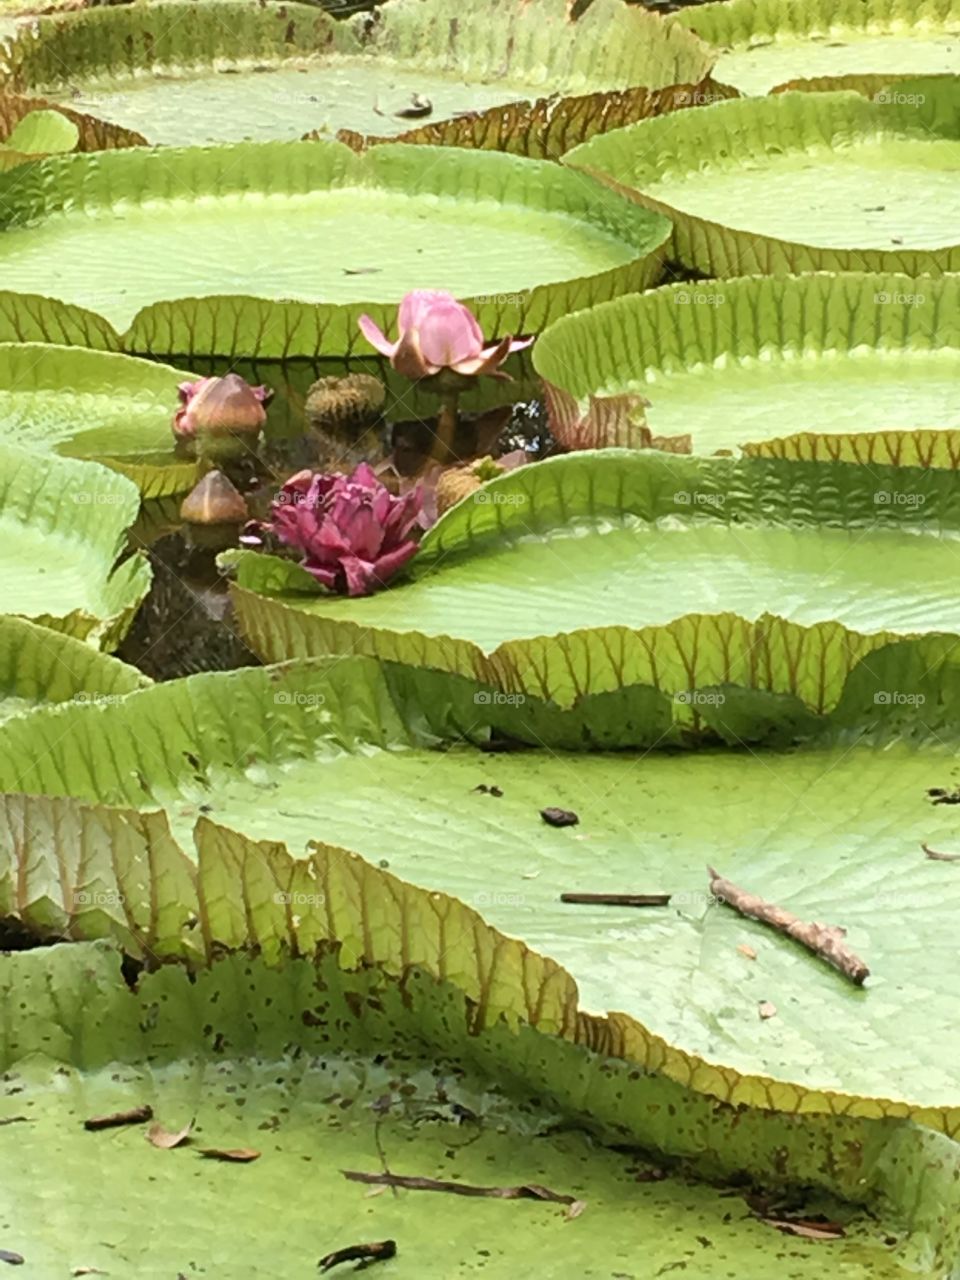 As gentle as a lily pad